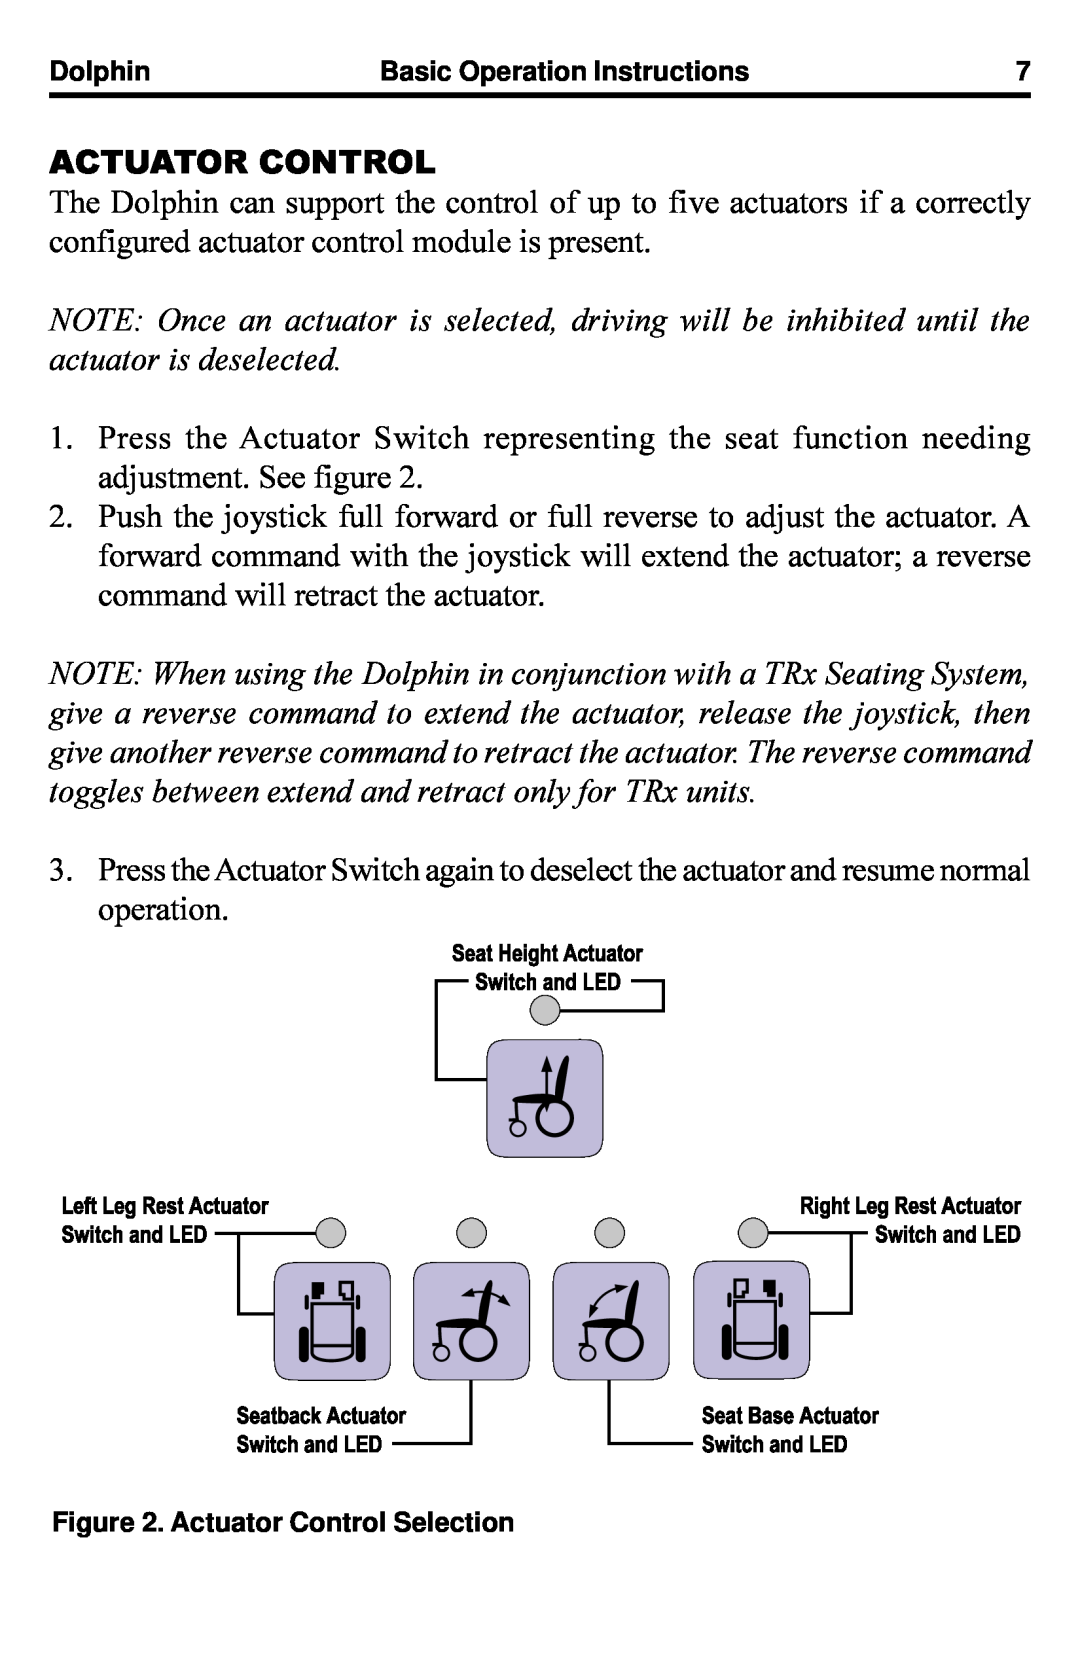 Quantum Dynamic Dolphin Remote manual Basic Operation Instructions, Actuator Control Selection 